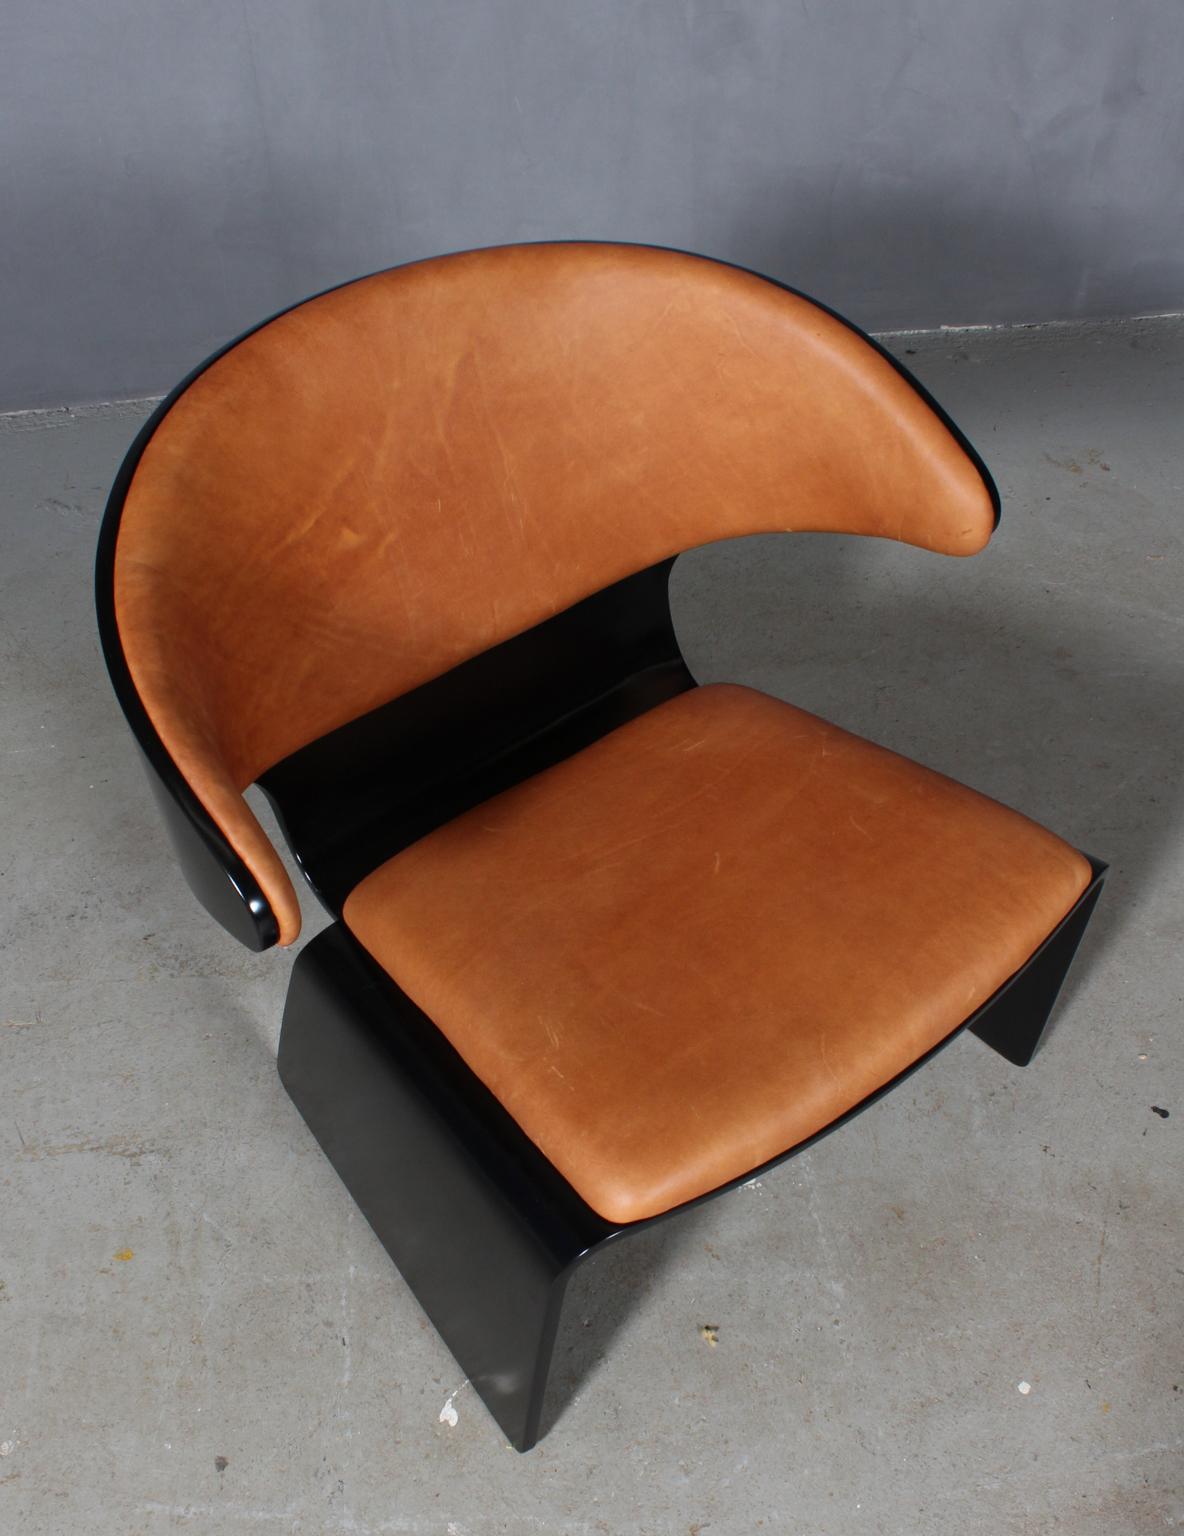 Hans Olsen Bikini chair with new lacquered frame.

New upholstered with vintage tan aniline leather.

This is a prototype made at Frem Røjle, it comes from the collection of a former employee at Frem Røjle.